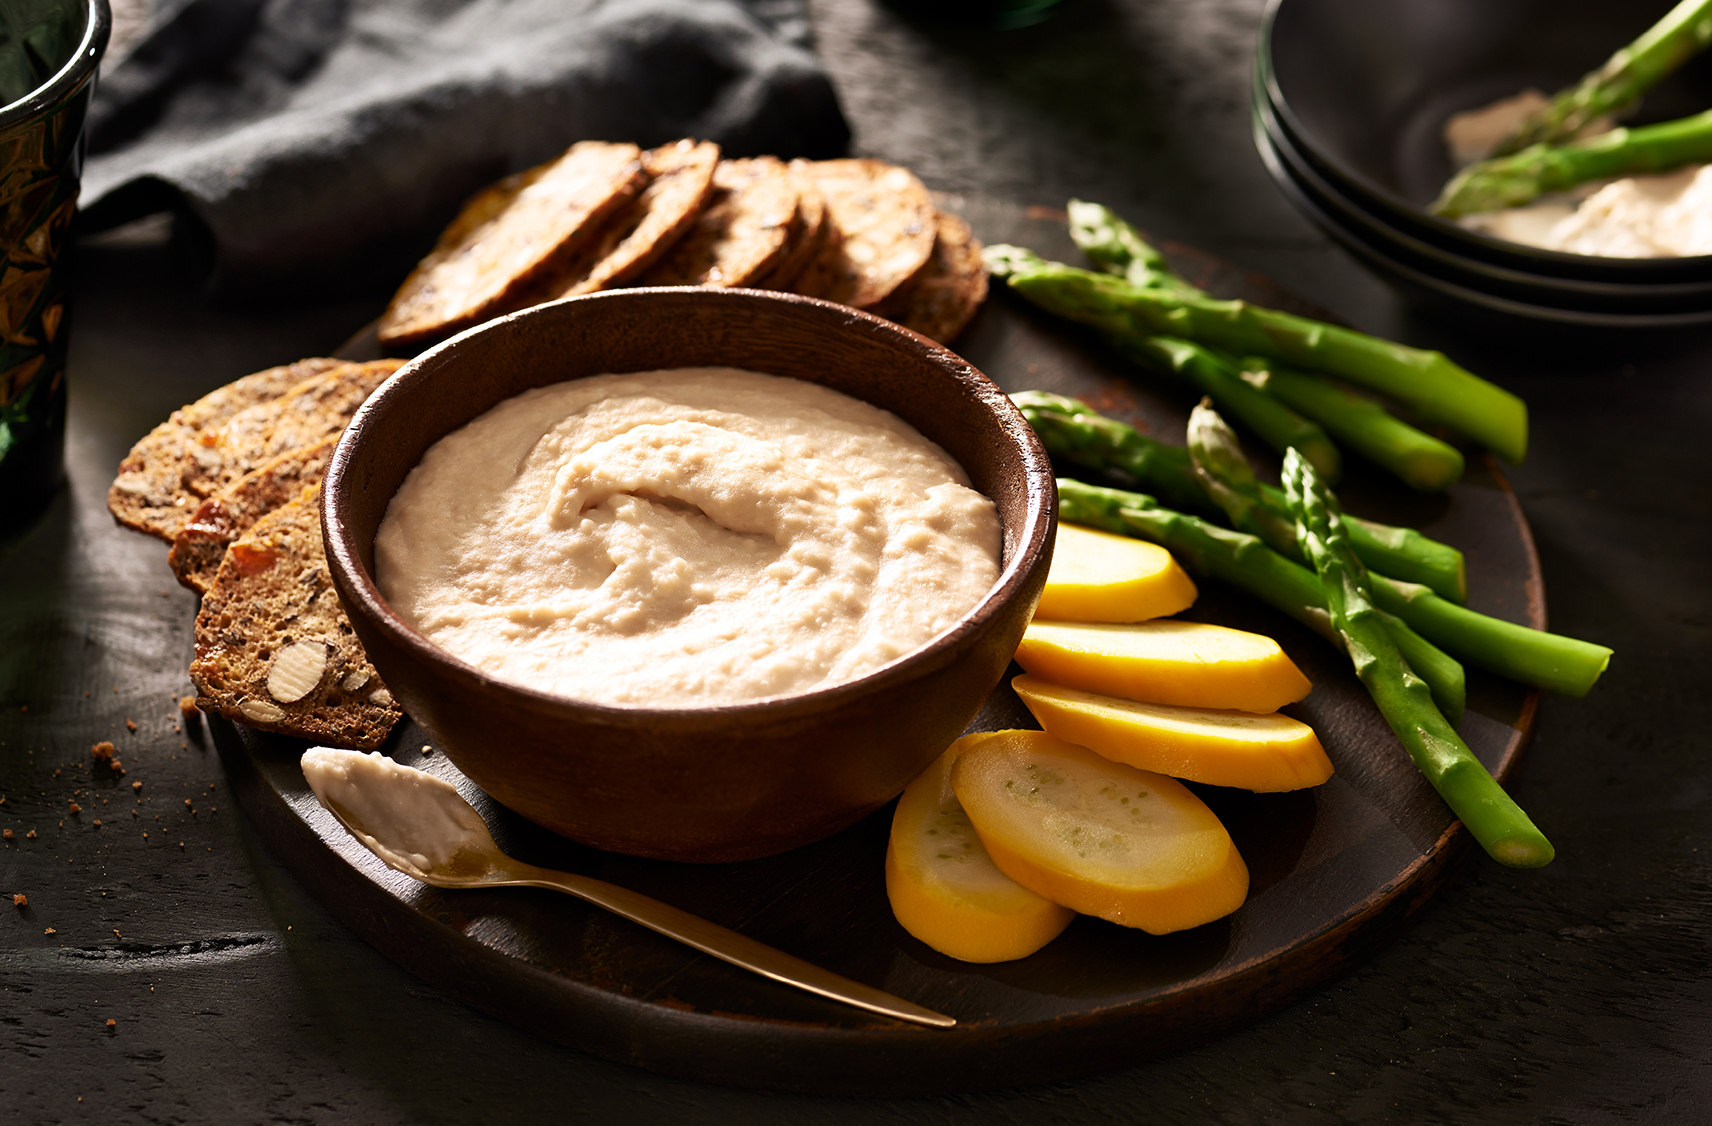 Chipotle and cheddar white bean dip in a small brown bowl.  slices of yellow zuchinni, crackers and asparagus placed around the bowl for dipping